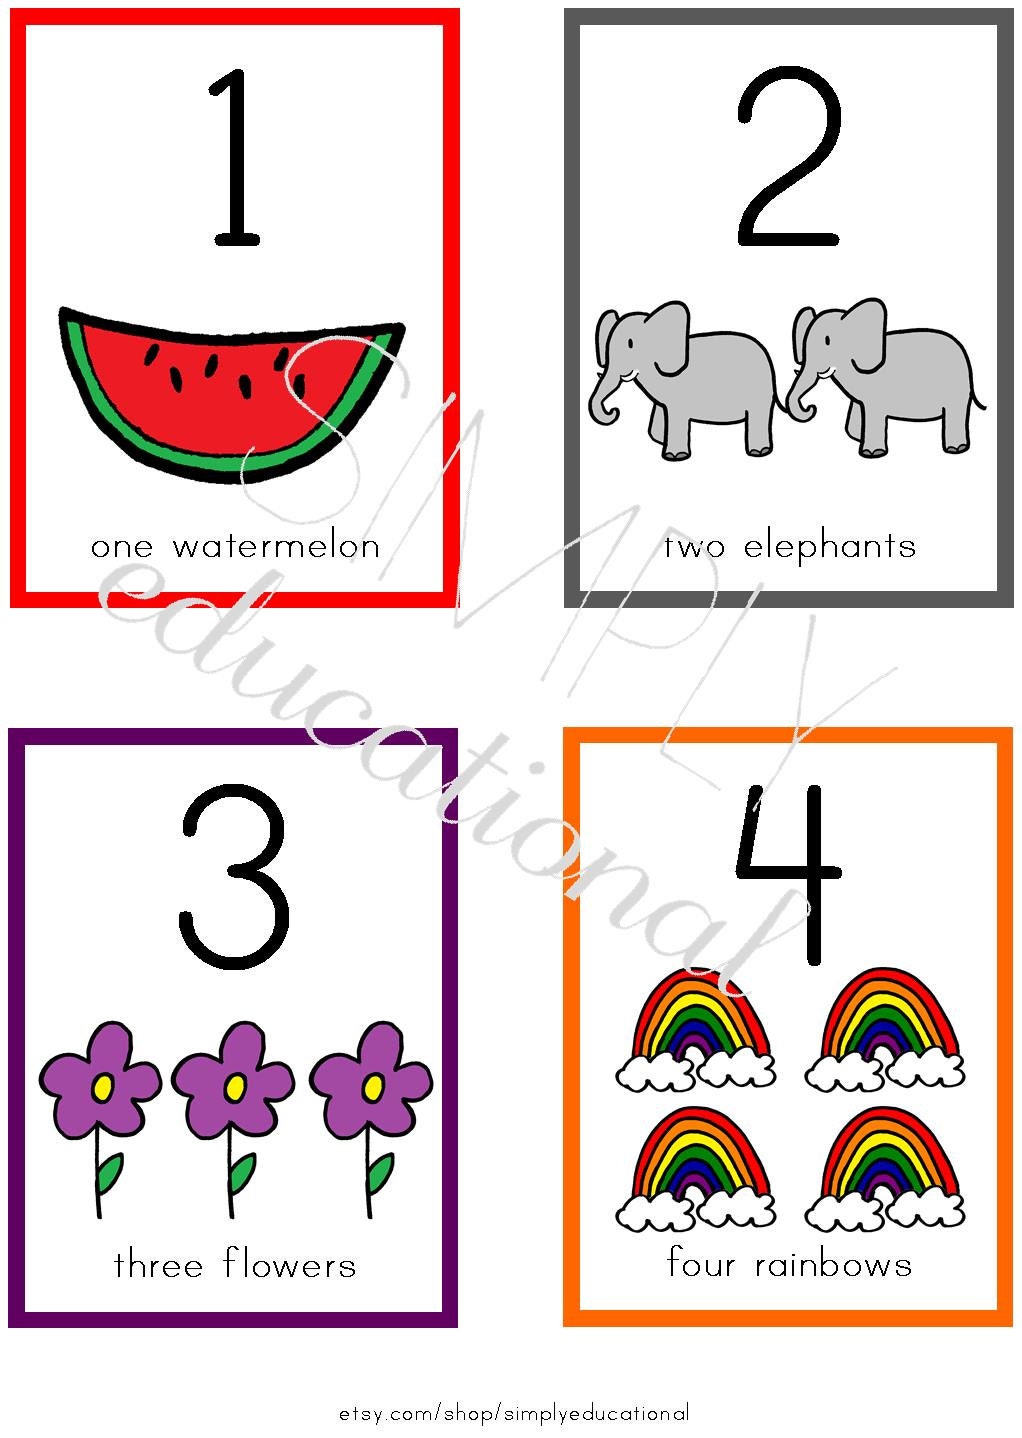 printable-number-flashcards-1-10-etsy